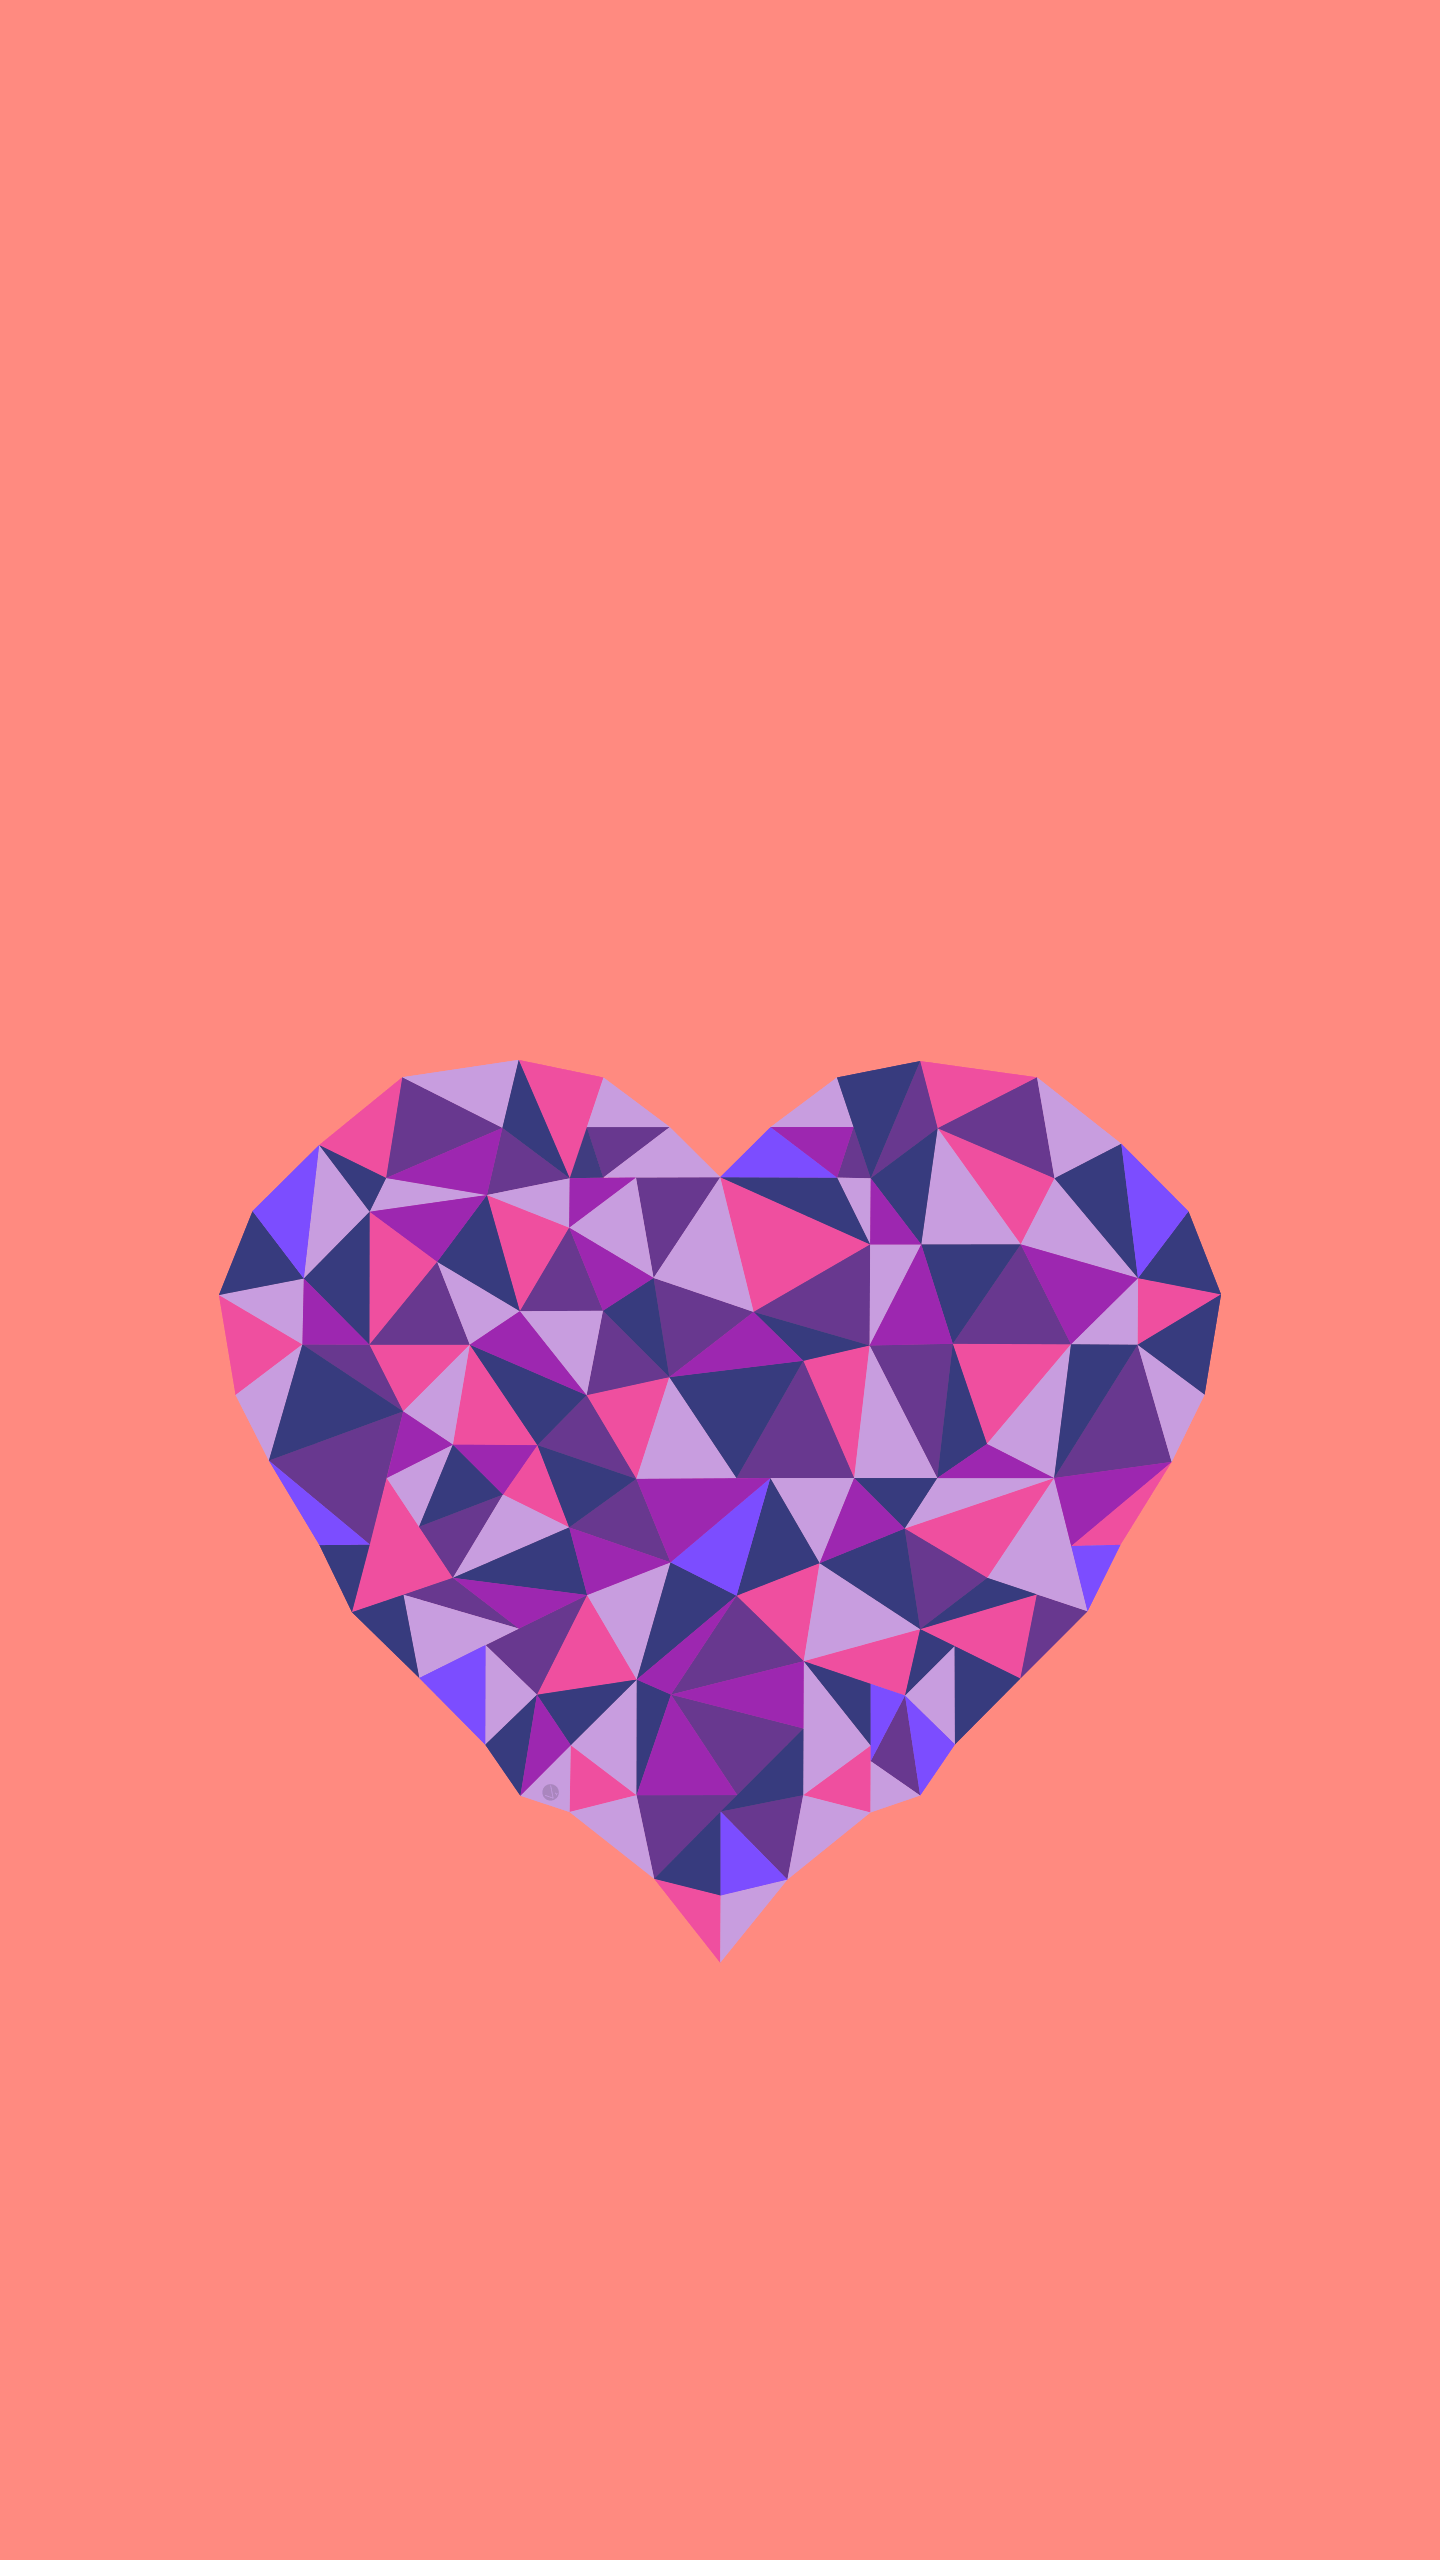 A heart made of triangles on an orange background - Heart